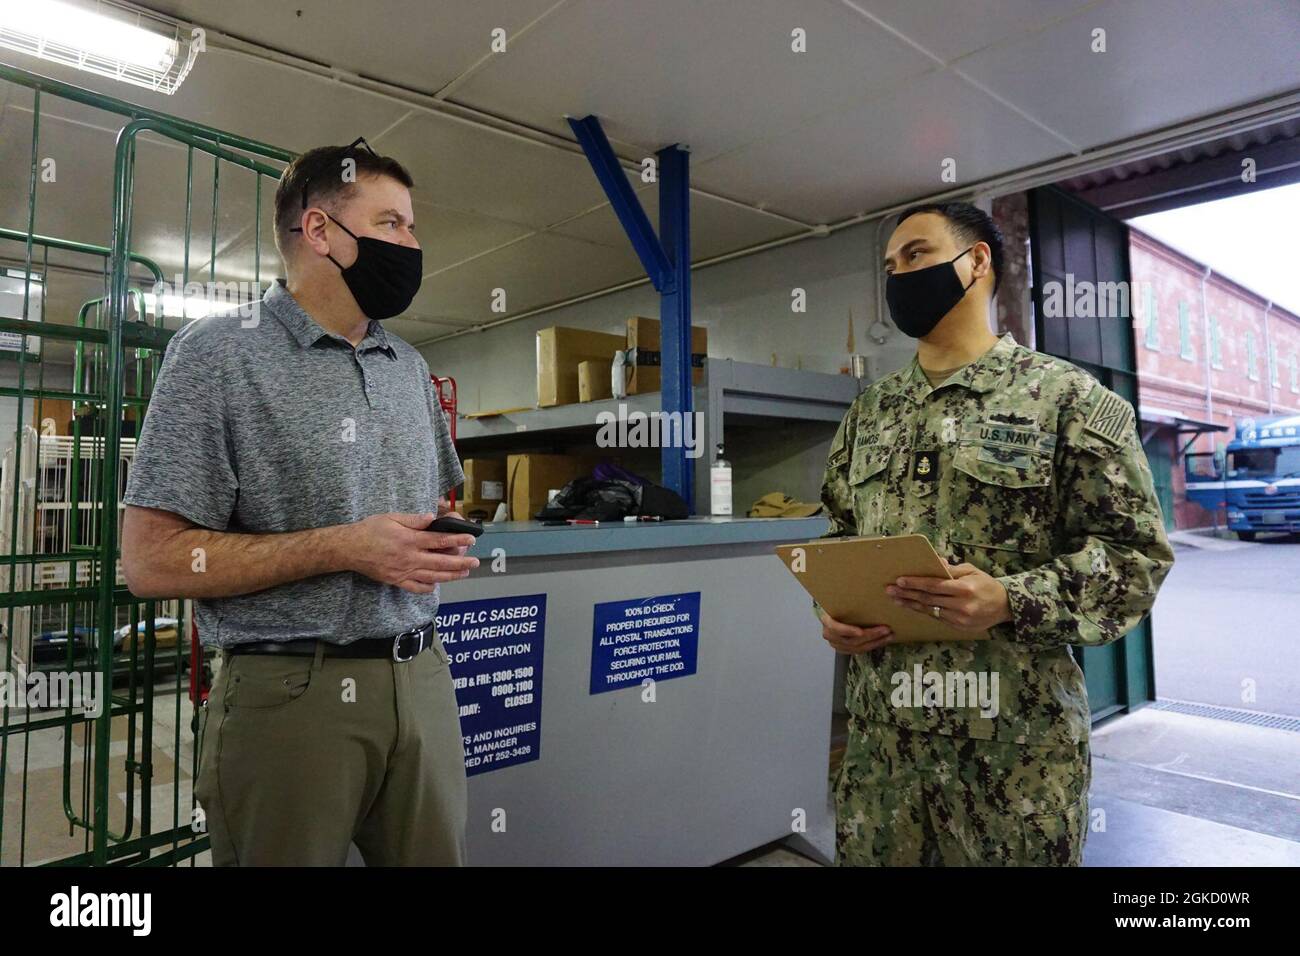 SASEBO, Japan (March 16, 2021) - NAVSUP Fleet Logistics Center Yokosuka  Regional Postal Manager James Clark (left) and Sasebo Post Office Leading  Chief Petty Officer Ronnel Ramos (right) review a checklist during